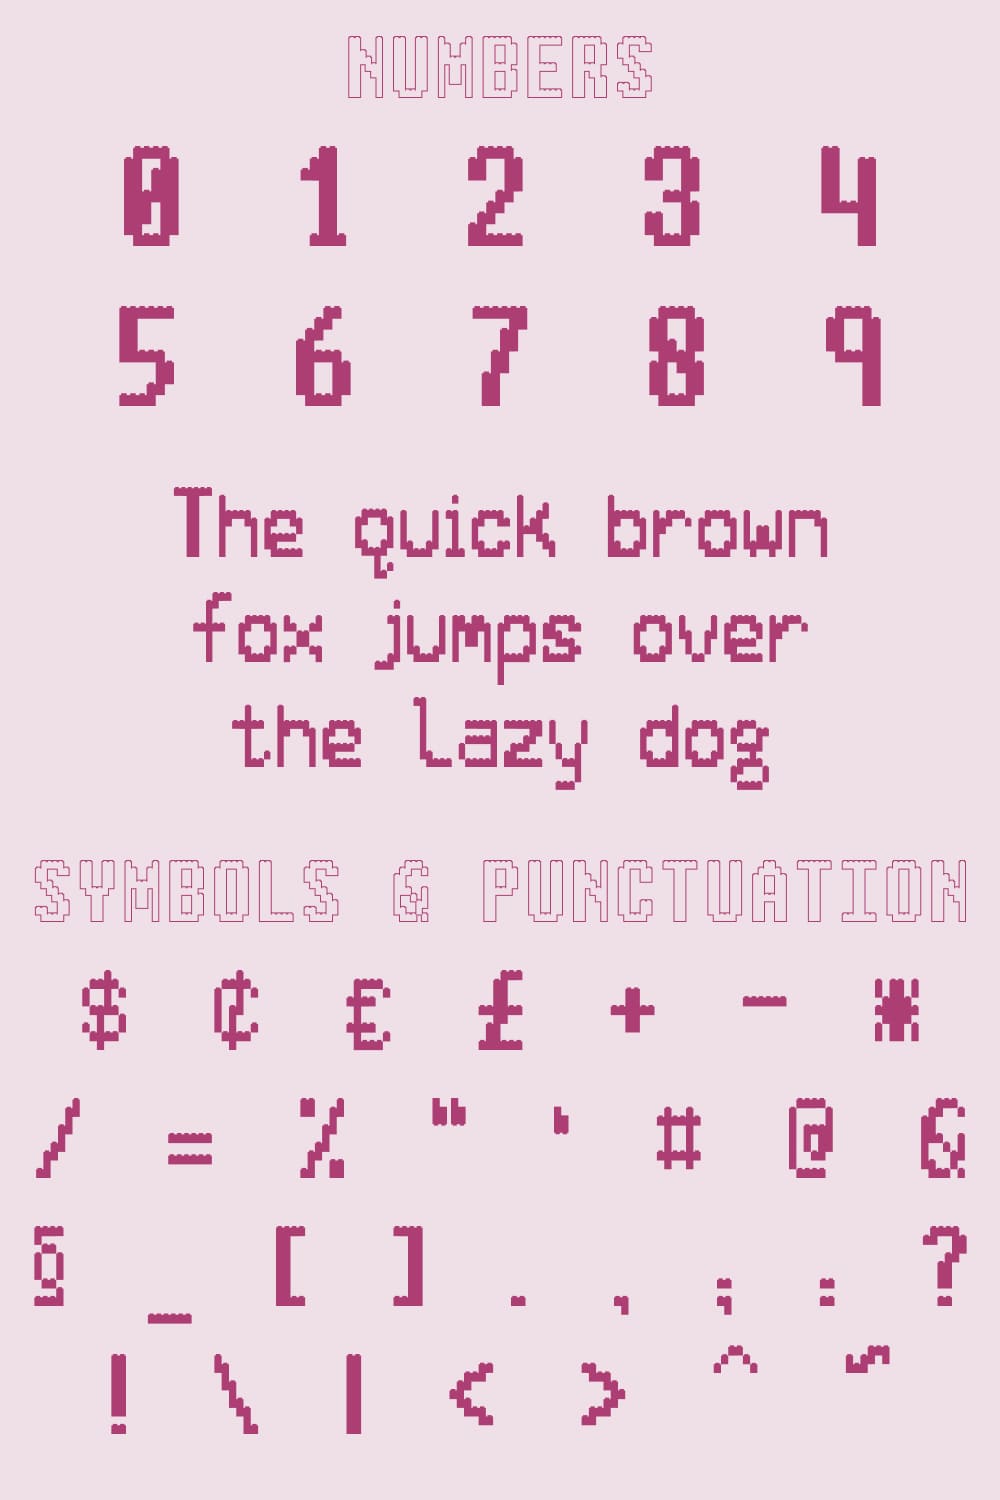 Numbers and symbols of this font.